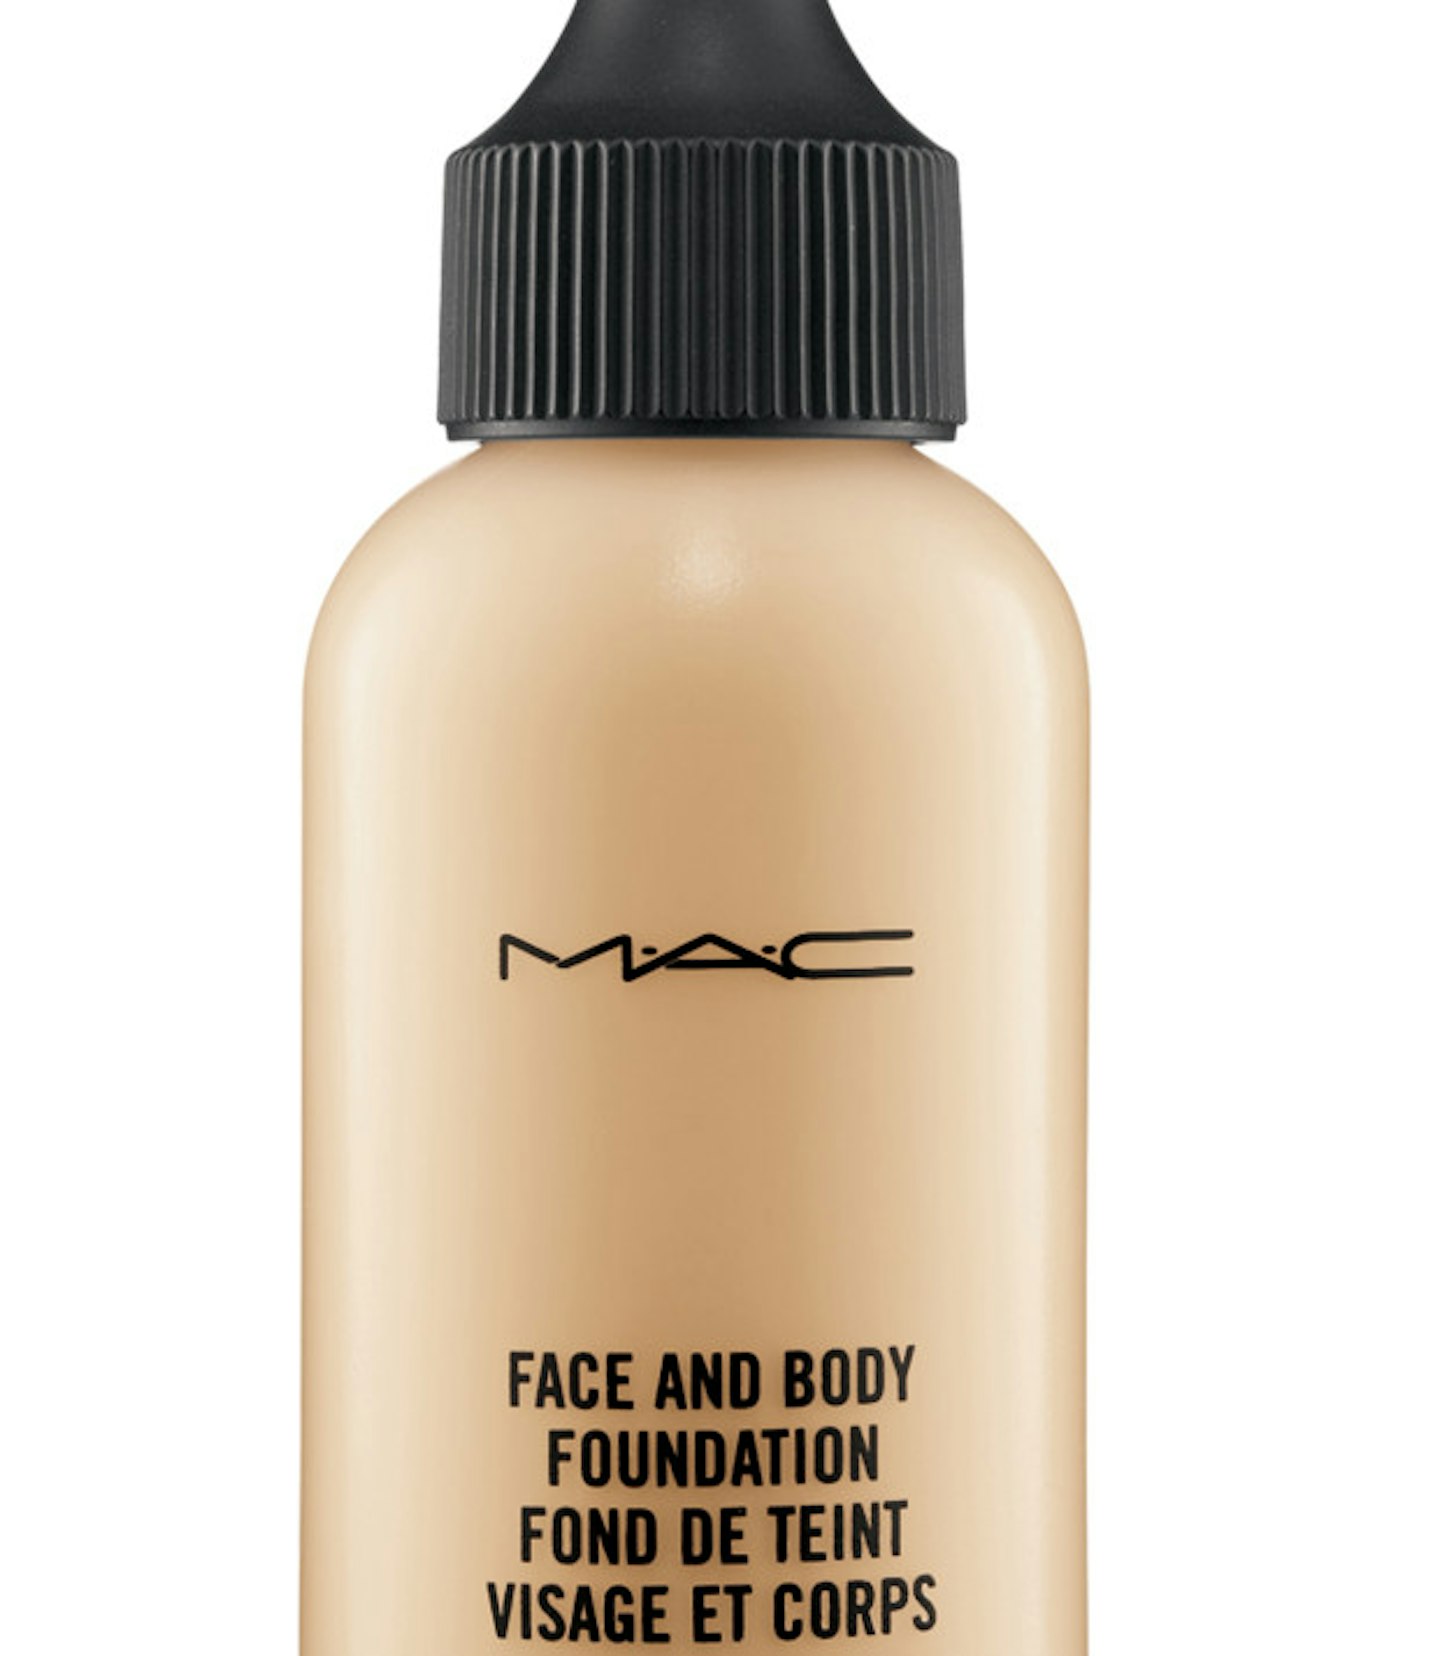 MAC Face and body foundation